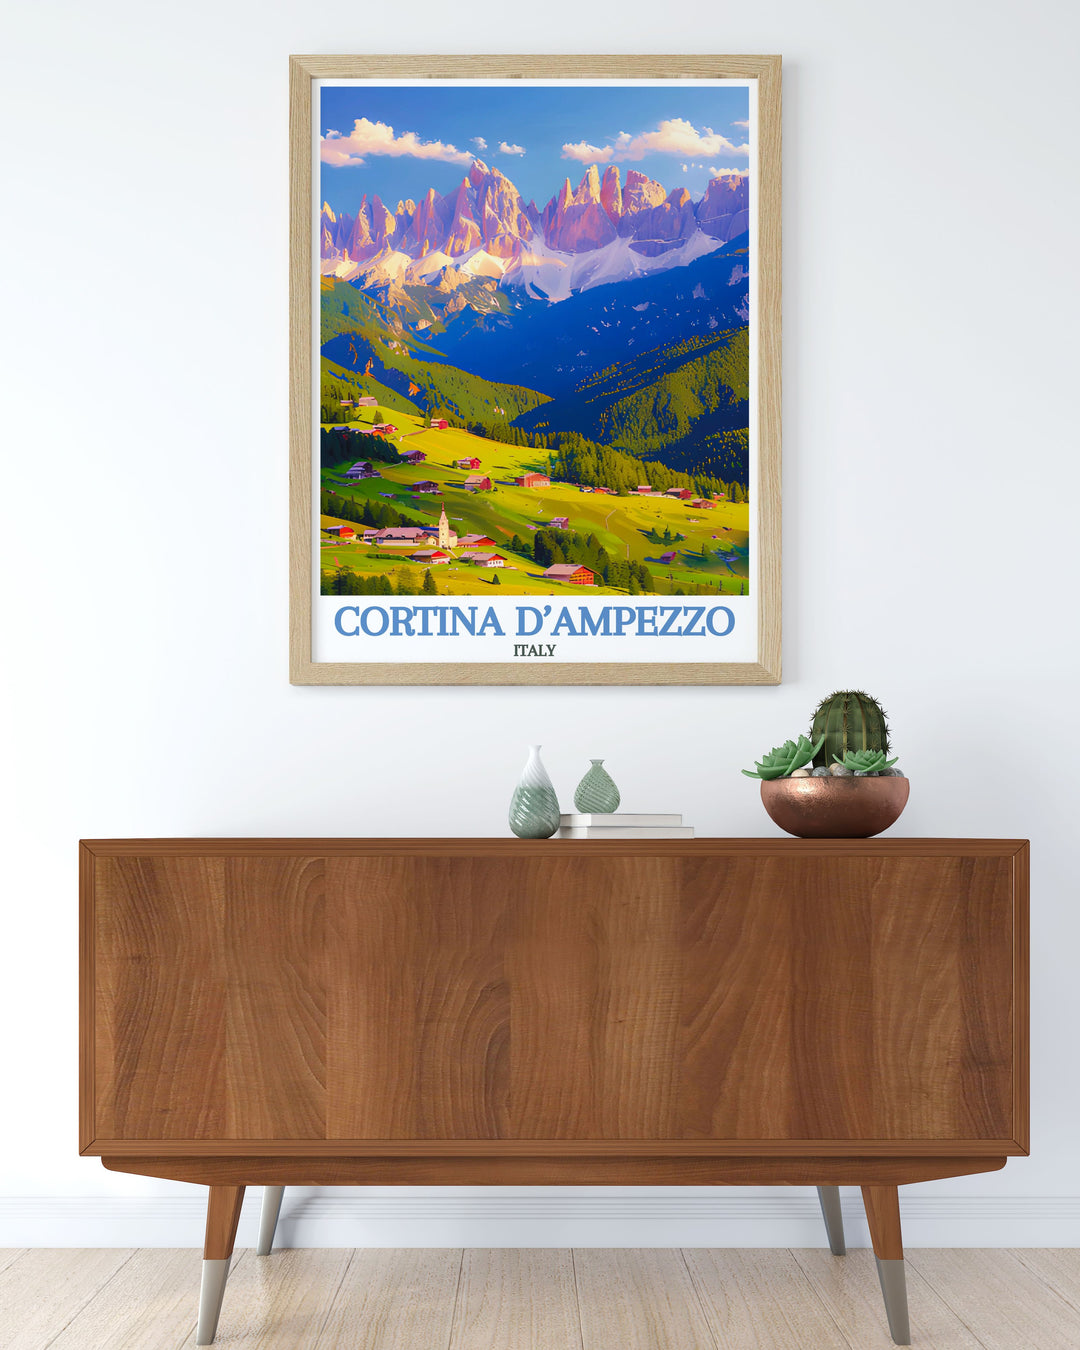 Capture the spirit of adventure with our Cortina dAmpezzo and Dolomite Mountains travel posters. From skiing and hiking to exploring historic sites, these prints showcase the diverse attractions of this beautiful Italian region, making them ideal for travel enthusiasts.